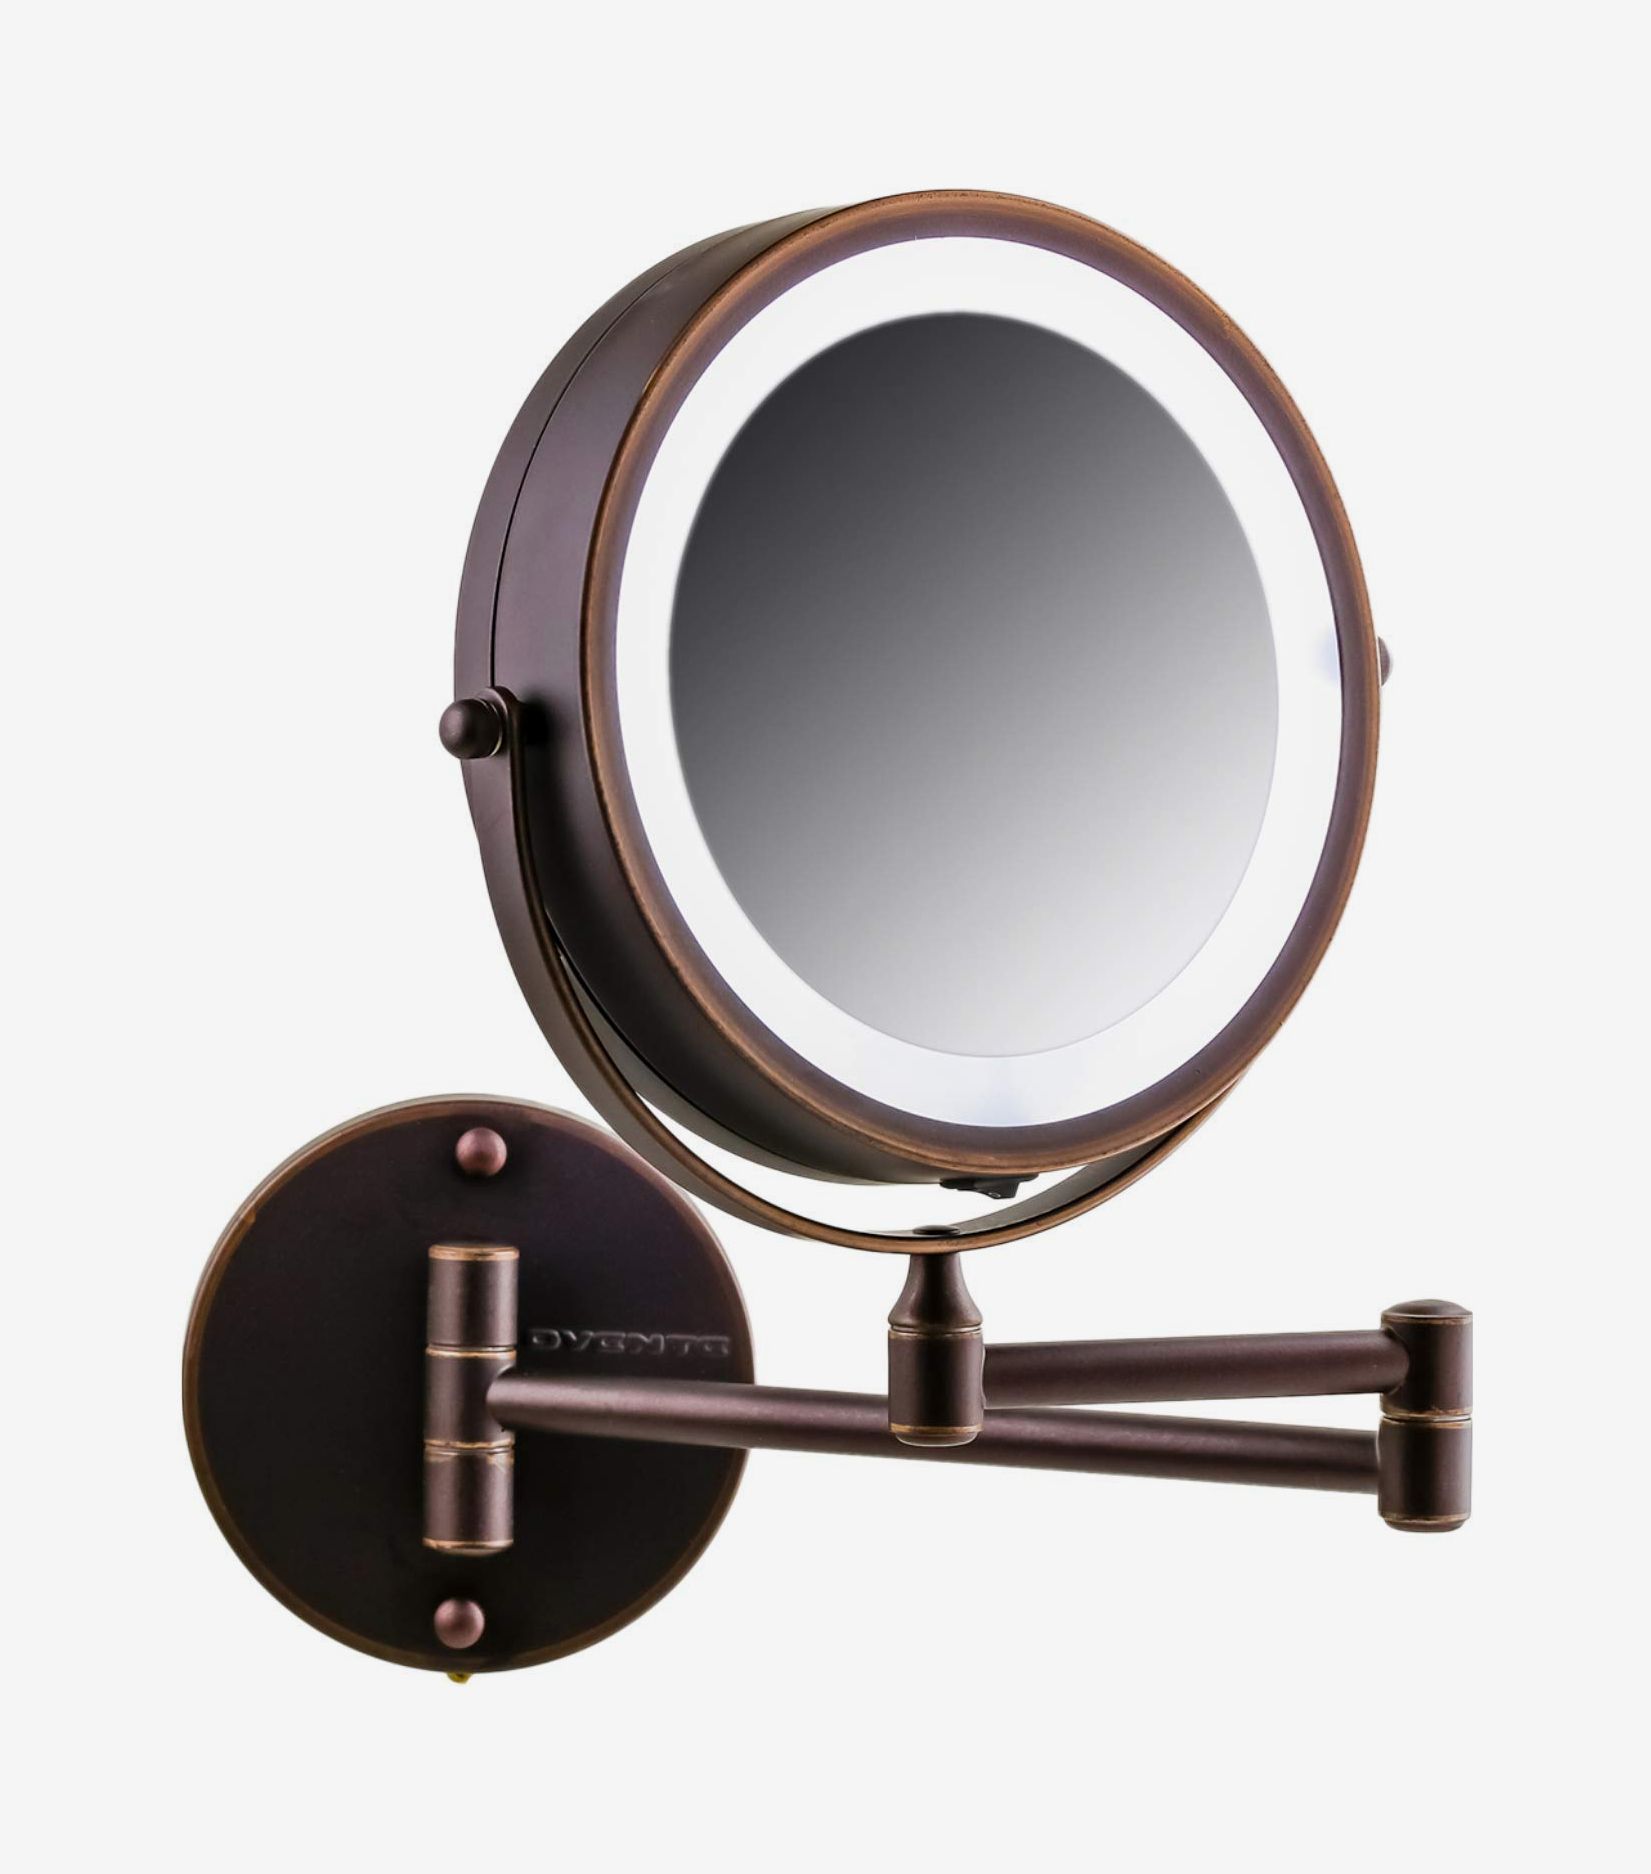 14 Best Lighted Makeup Mirrors 2021, Wall Hanging Lighted Makeup Mirror